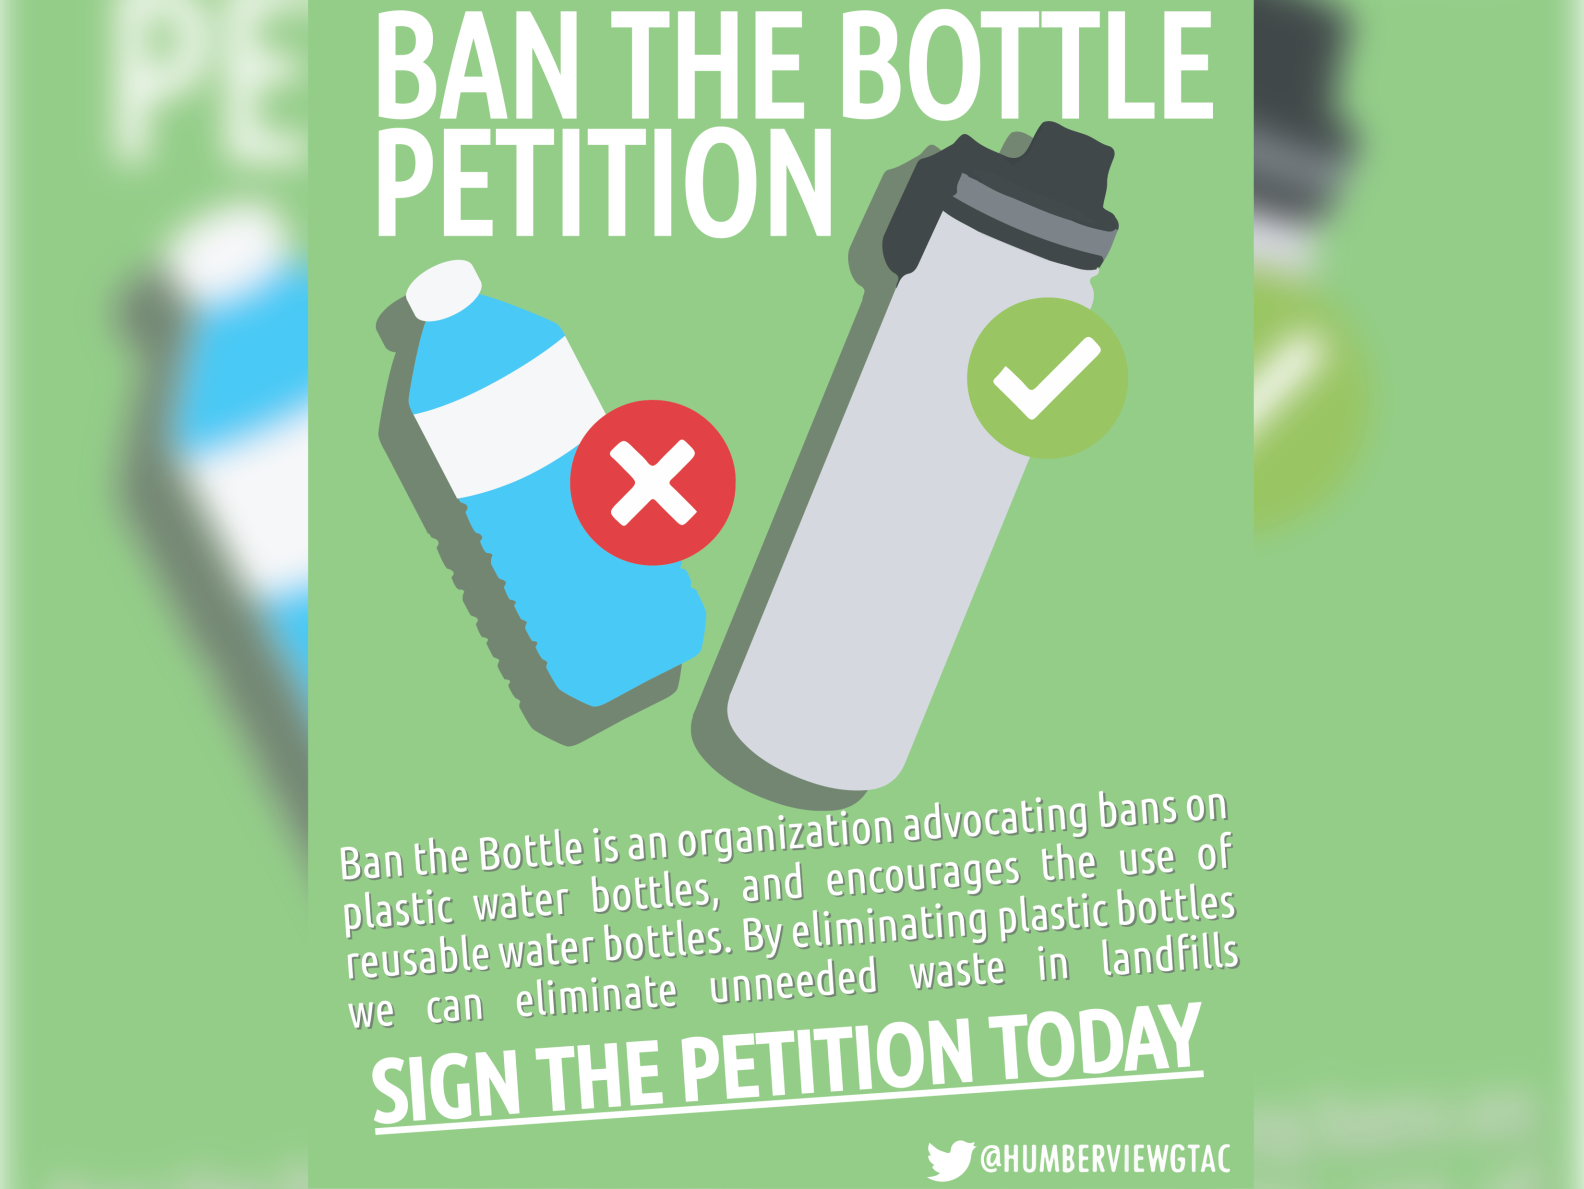 ban the bottle poster by Mahad Rehan on Dribbble